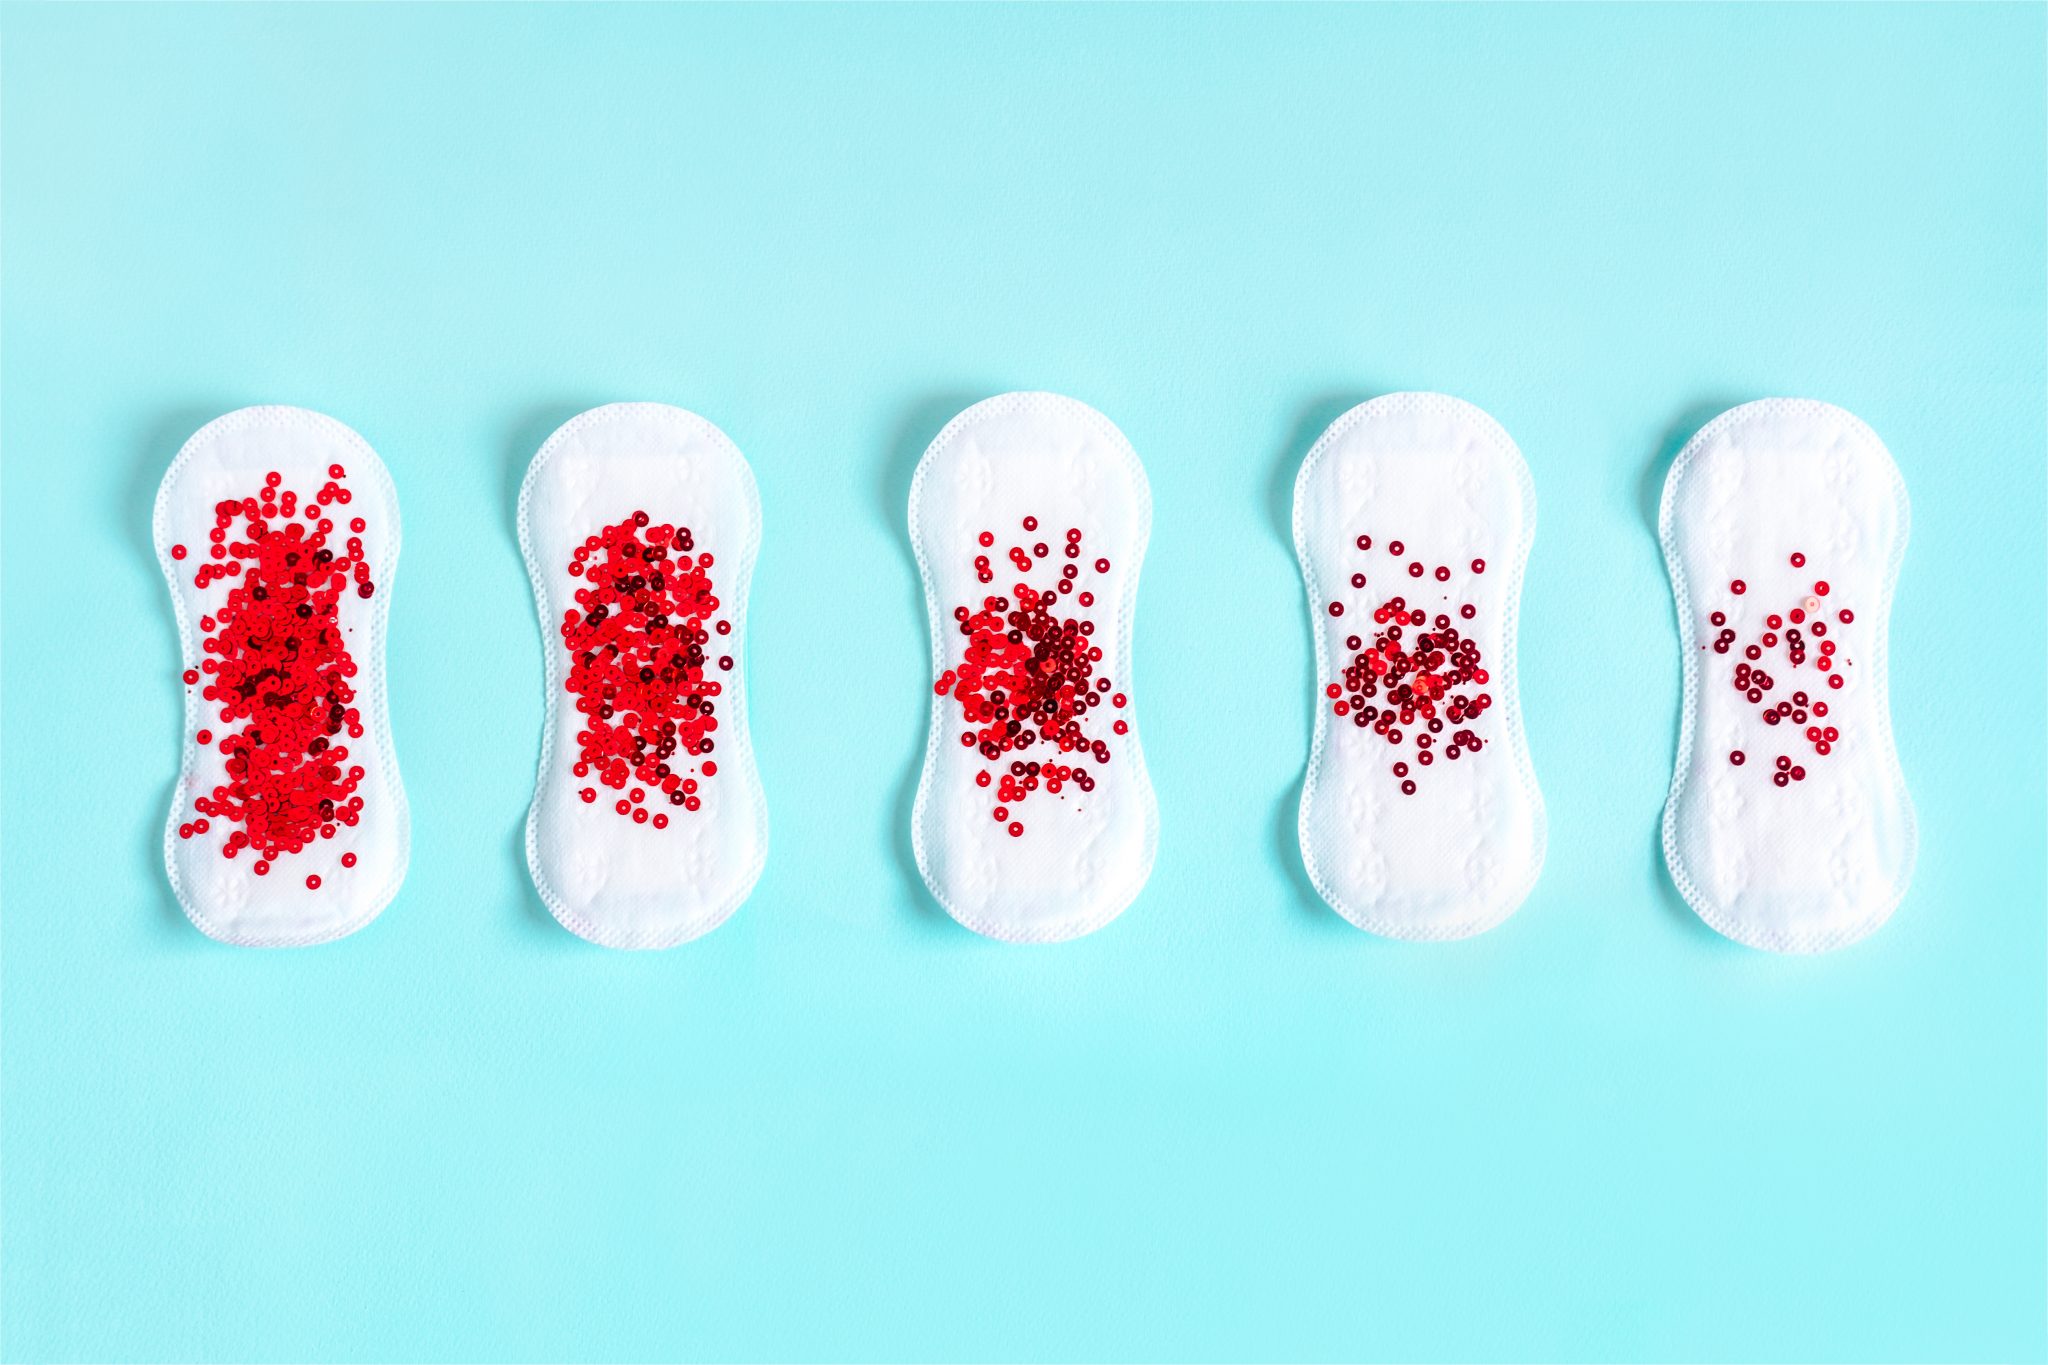 Can you lose too much blood during your period?